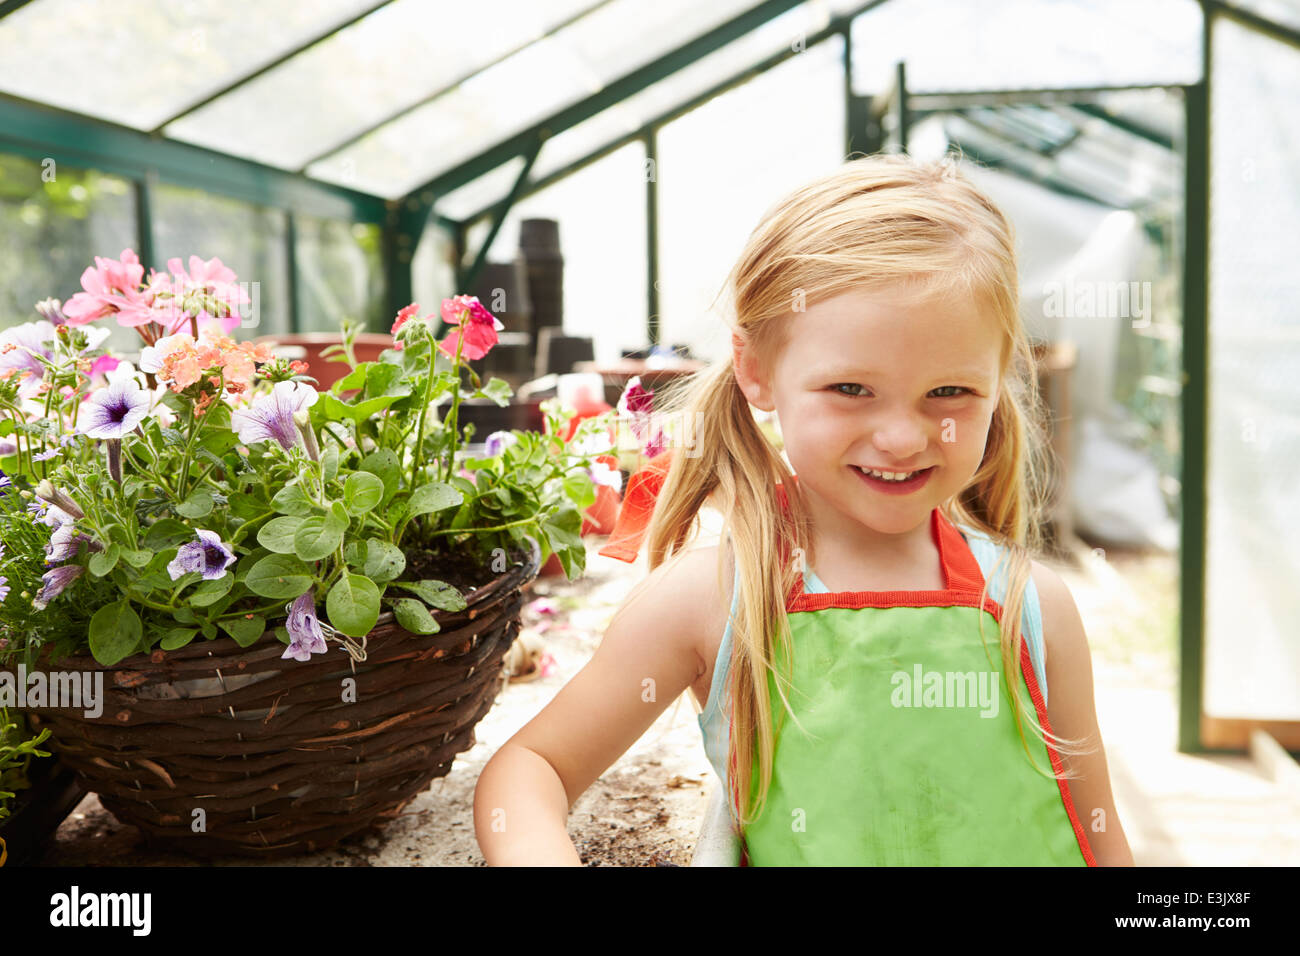 Girl Growing Plants In Greenhouse Stock Photo